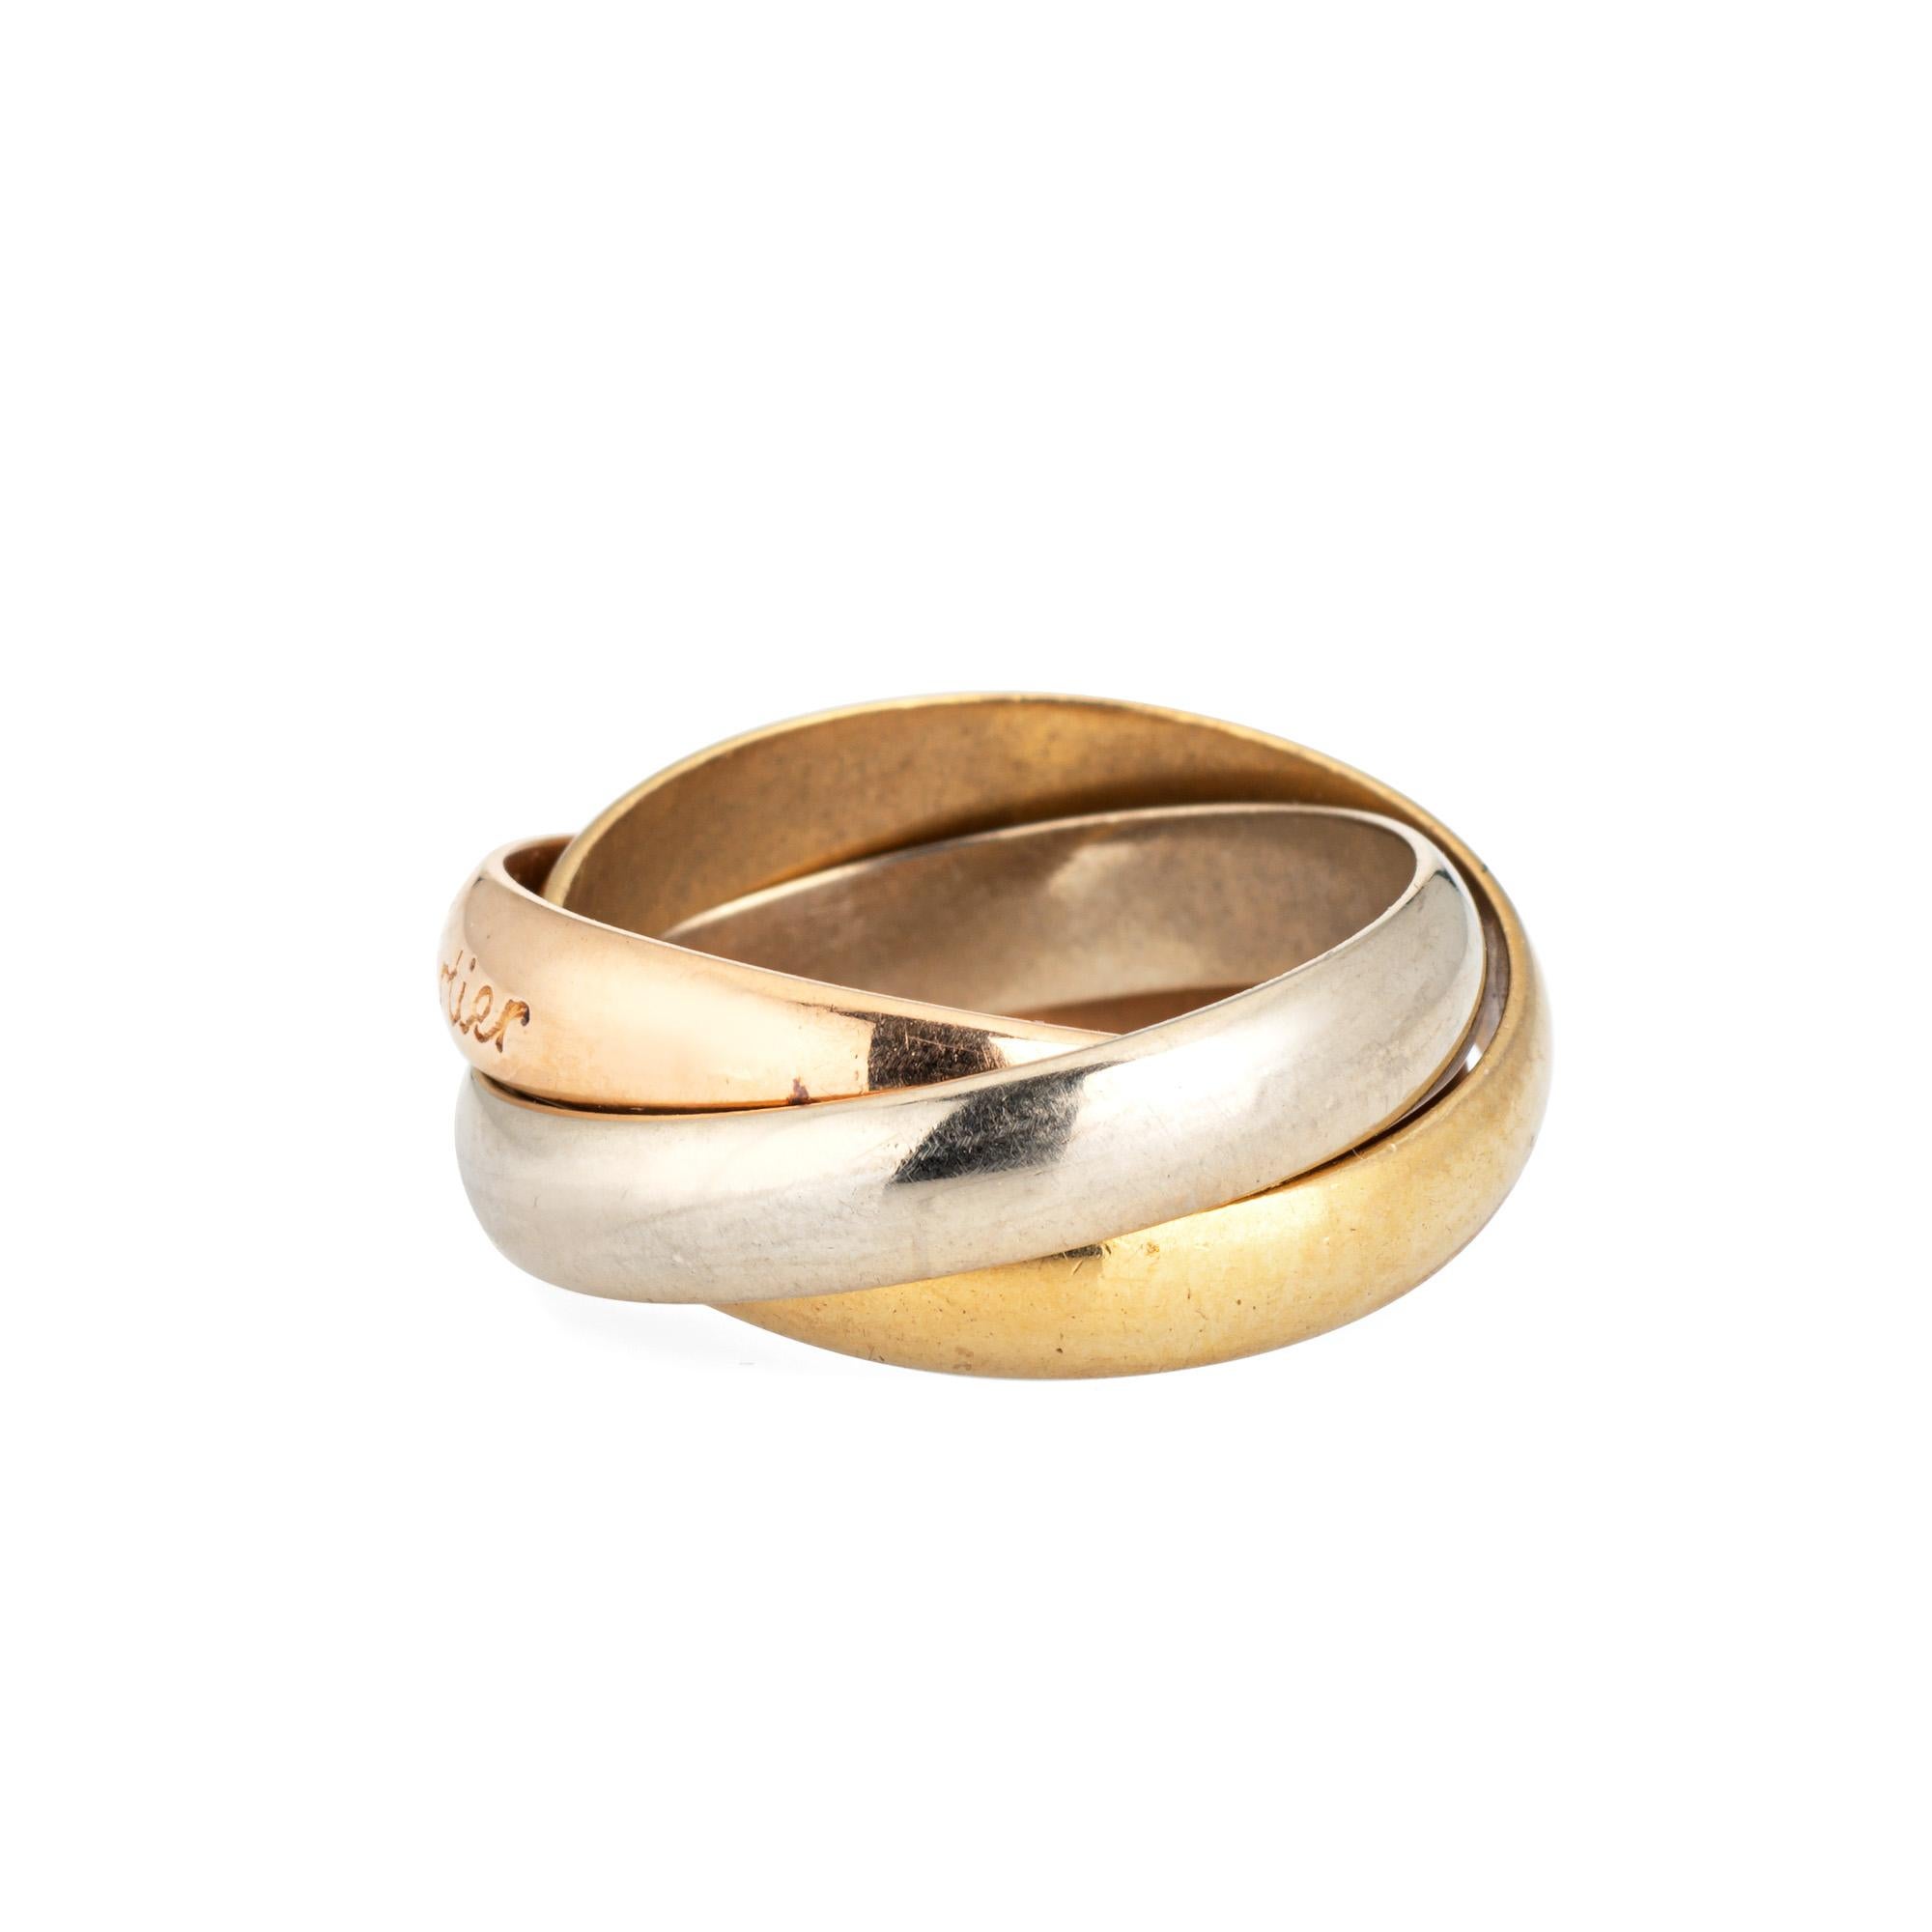 Vintage les Must de Cartier Trinity ring crafted in 18k yellow, white & rose gold (circa 1980s).  

The Cartier ring features 3 bands of 18k rose, yellow & white gold. Each band measures 3.5mm wide. The ring is great worn alone or layered with your